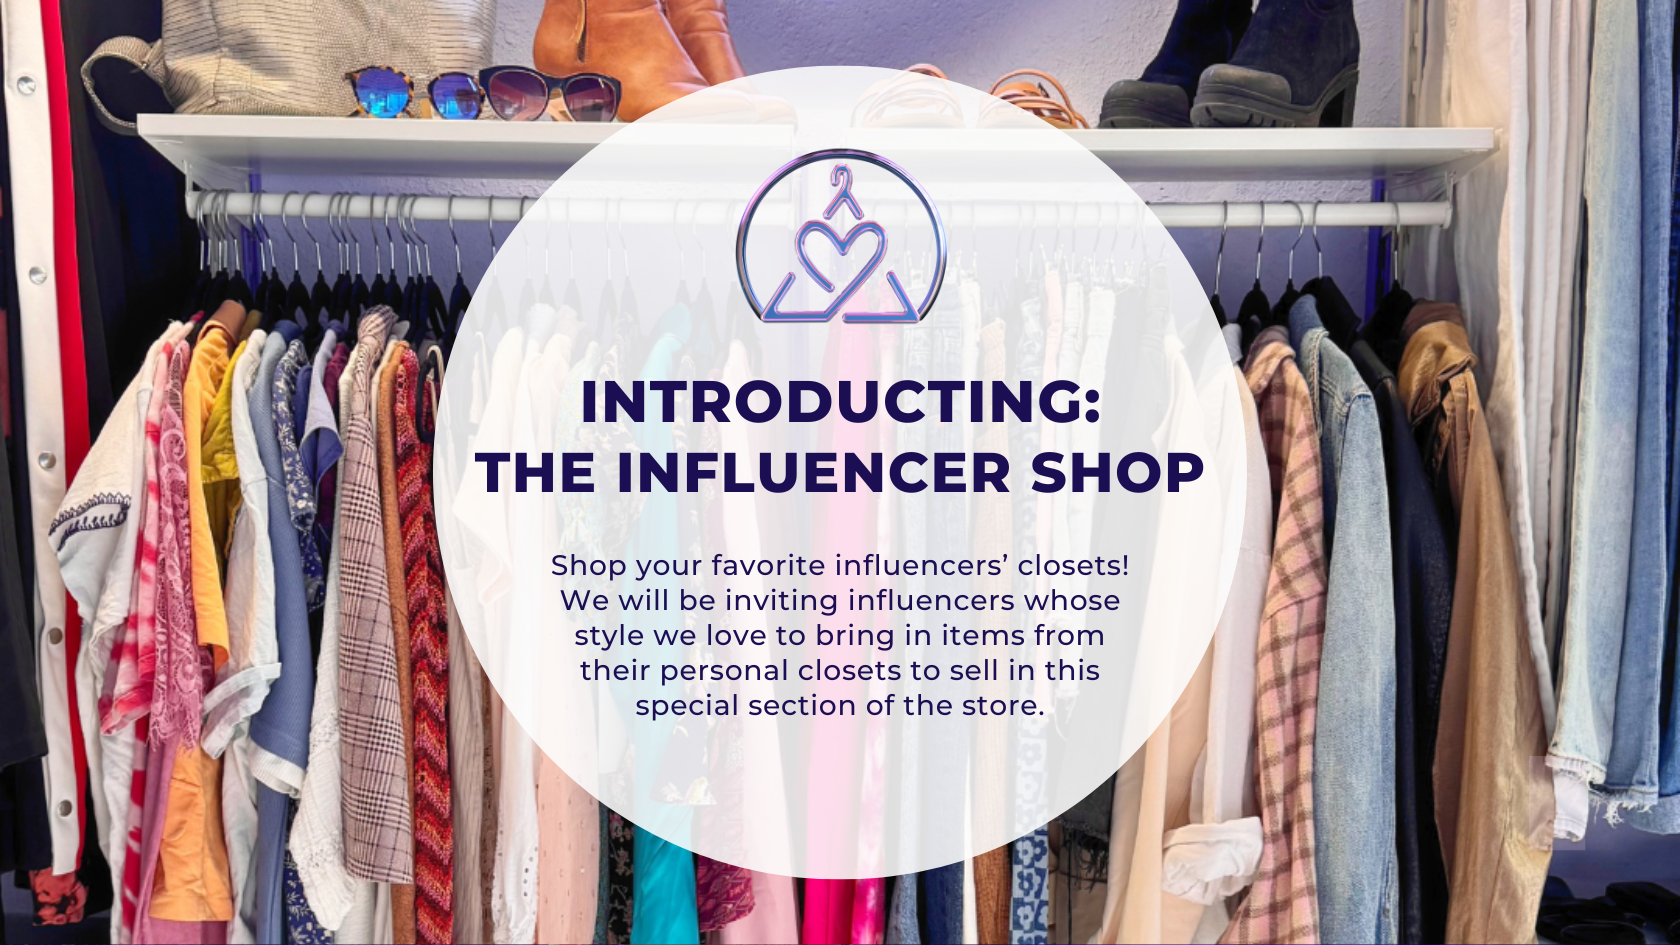 Introducing the Influencer Shop at Dressed by Danielle